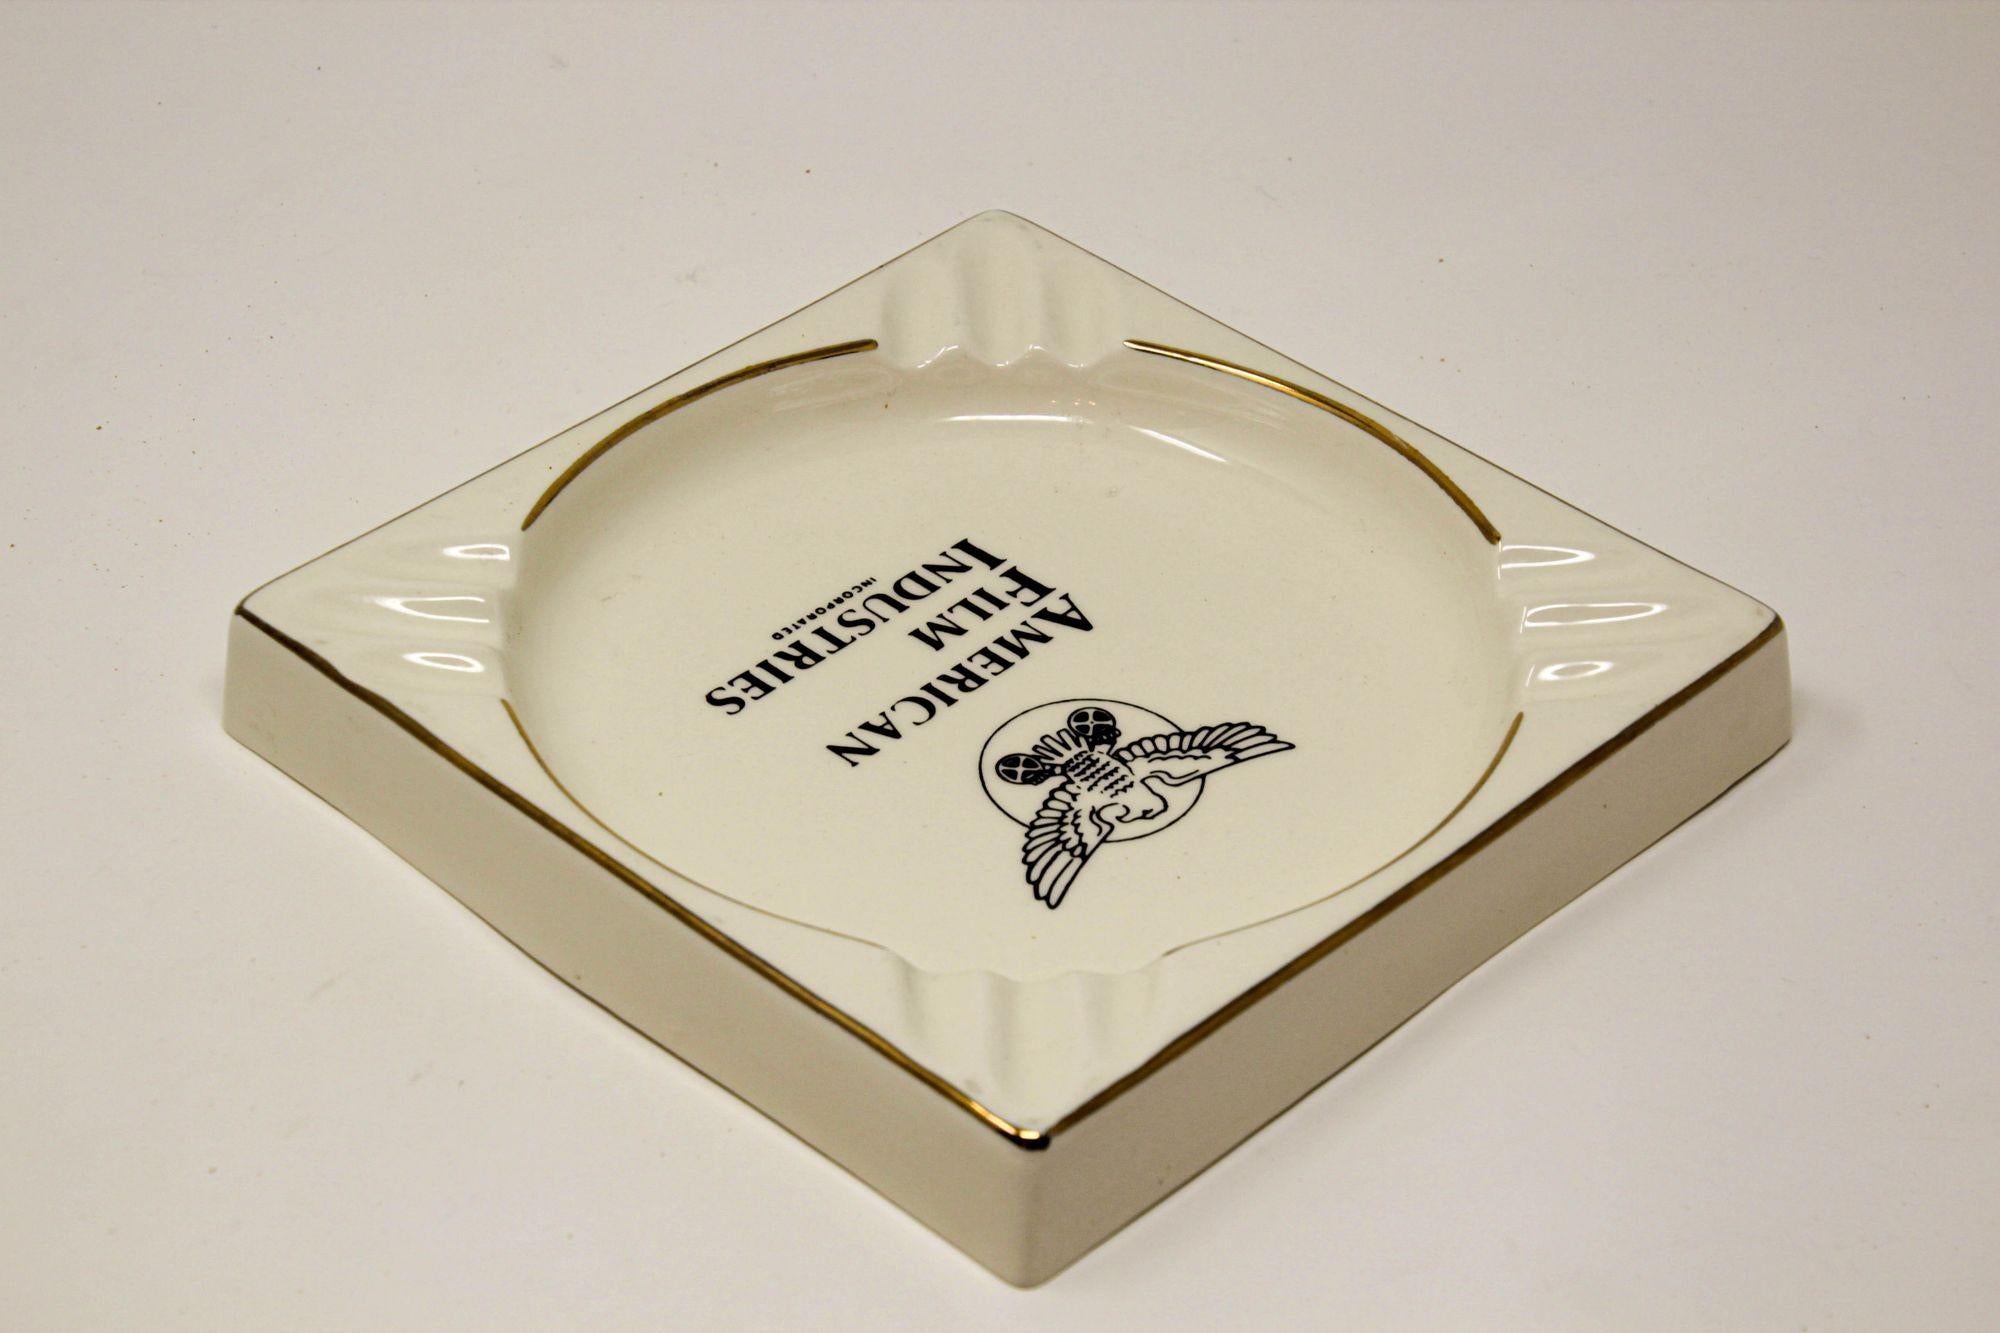 Vintage American Film Industries Incorporated Large Ceramic Ashtray For Sale 6